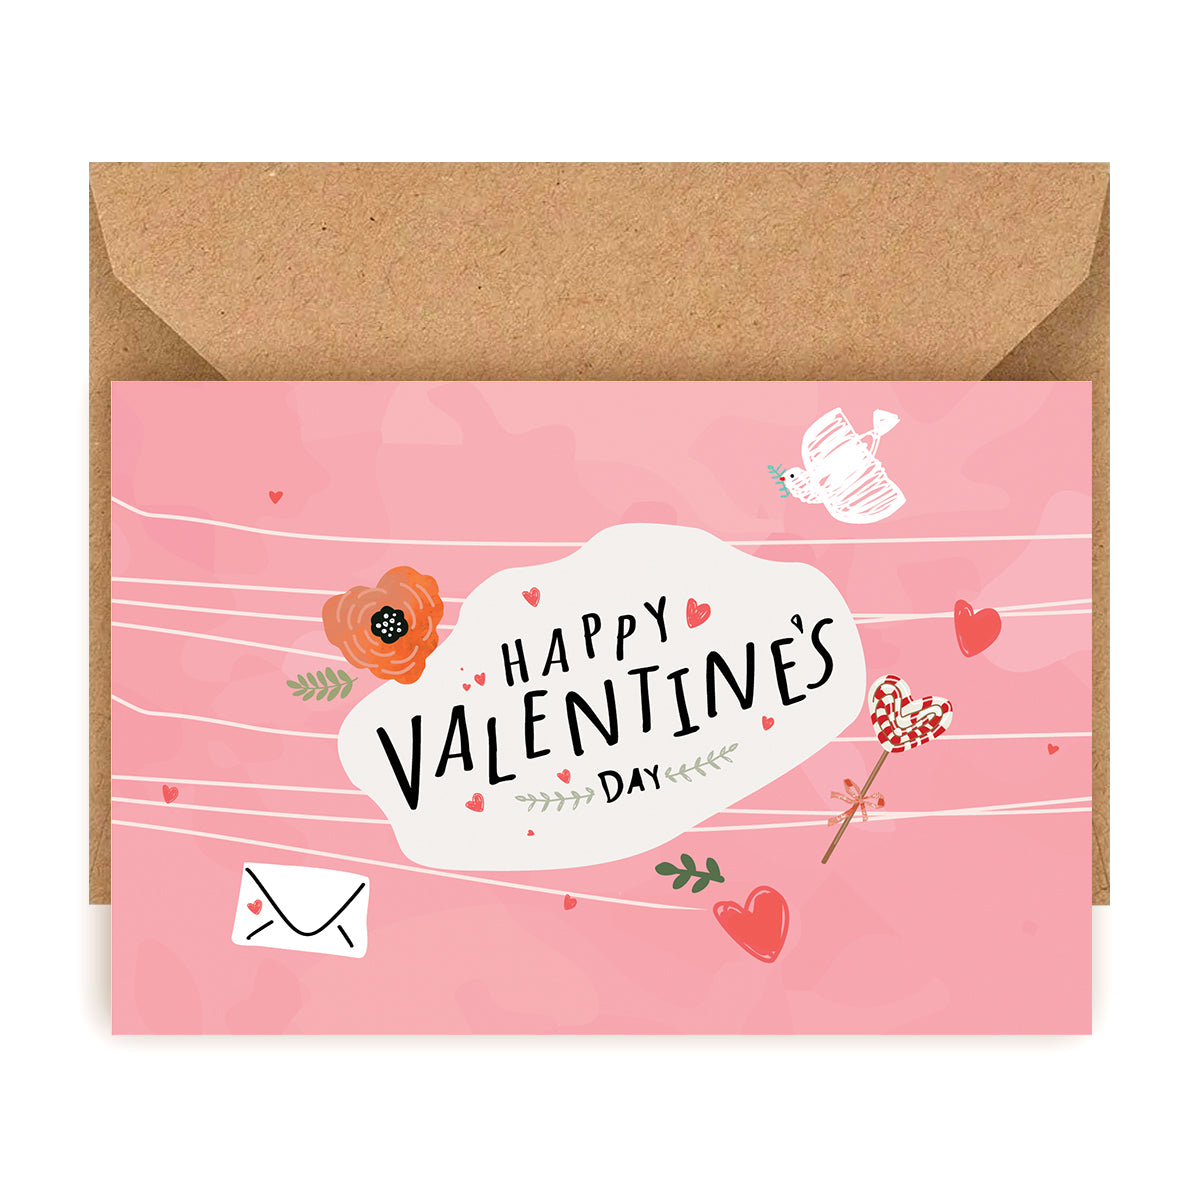 Valentine Cards, Valentine Card Ideas, Valentine's Greeting Card, Valentine's Day Cards Perfect for Your Sweetheart, Valentine's Day Cards for Sale, Valentine's Day Card with Envelope, Special Valentine's Day Card for Her/Him, Where to Buy Valentines Card